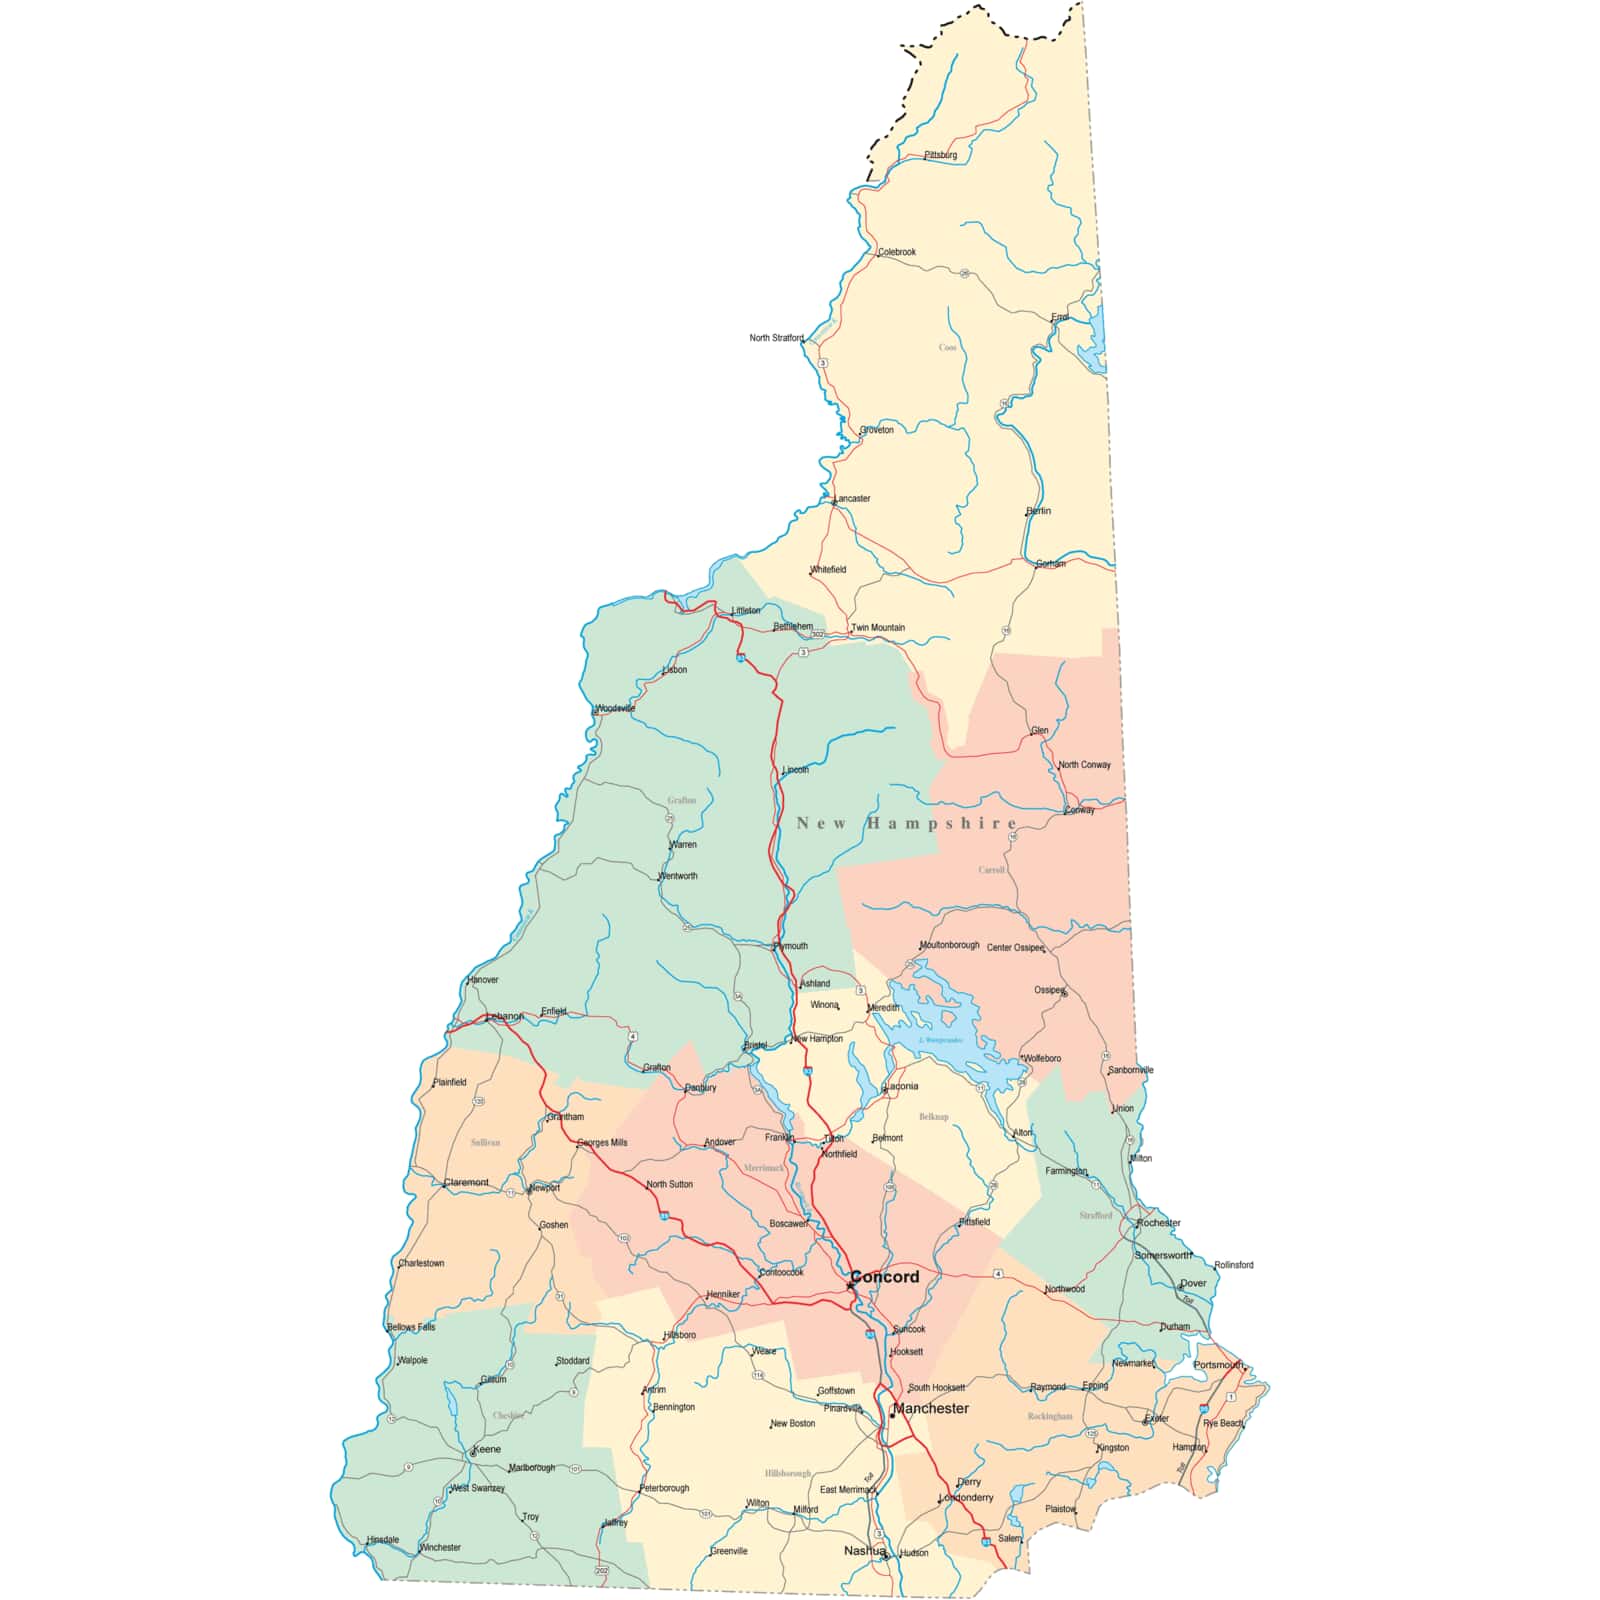 new hampshire highway map New Hampshire Road Map Nh Road Map New Hampshire Highway Map new hampshire highway map